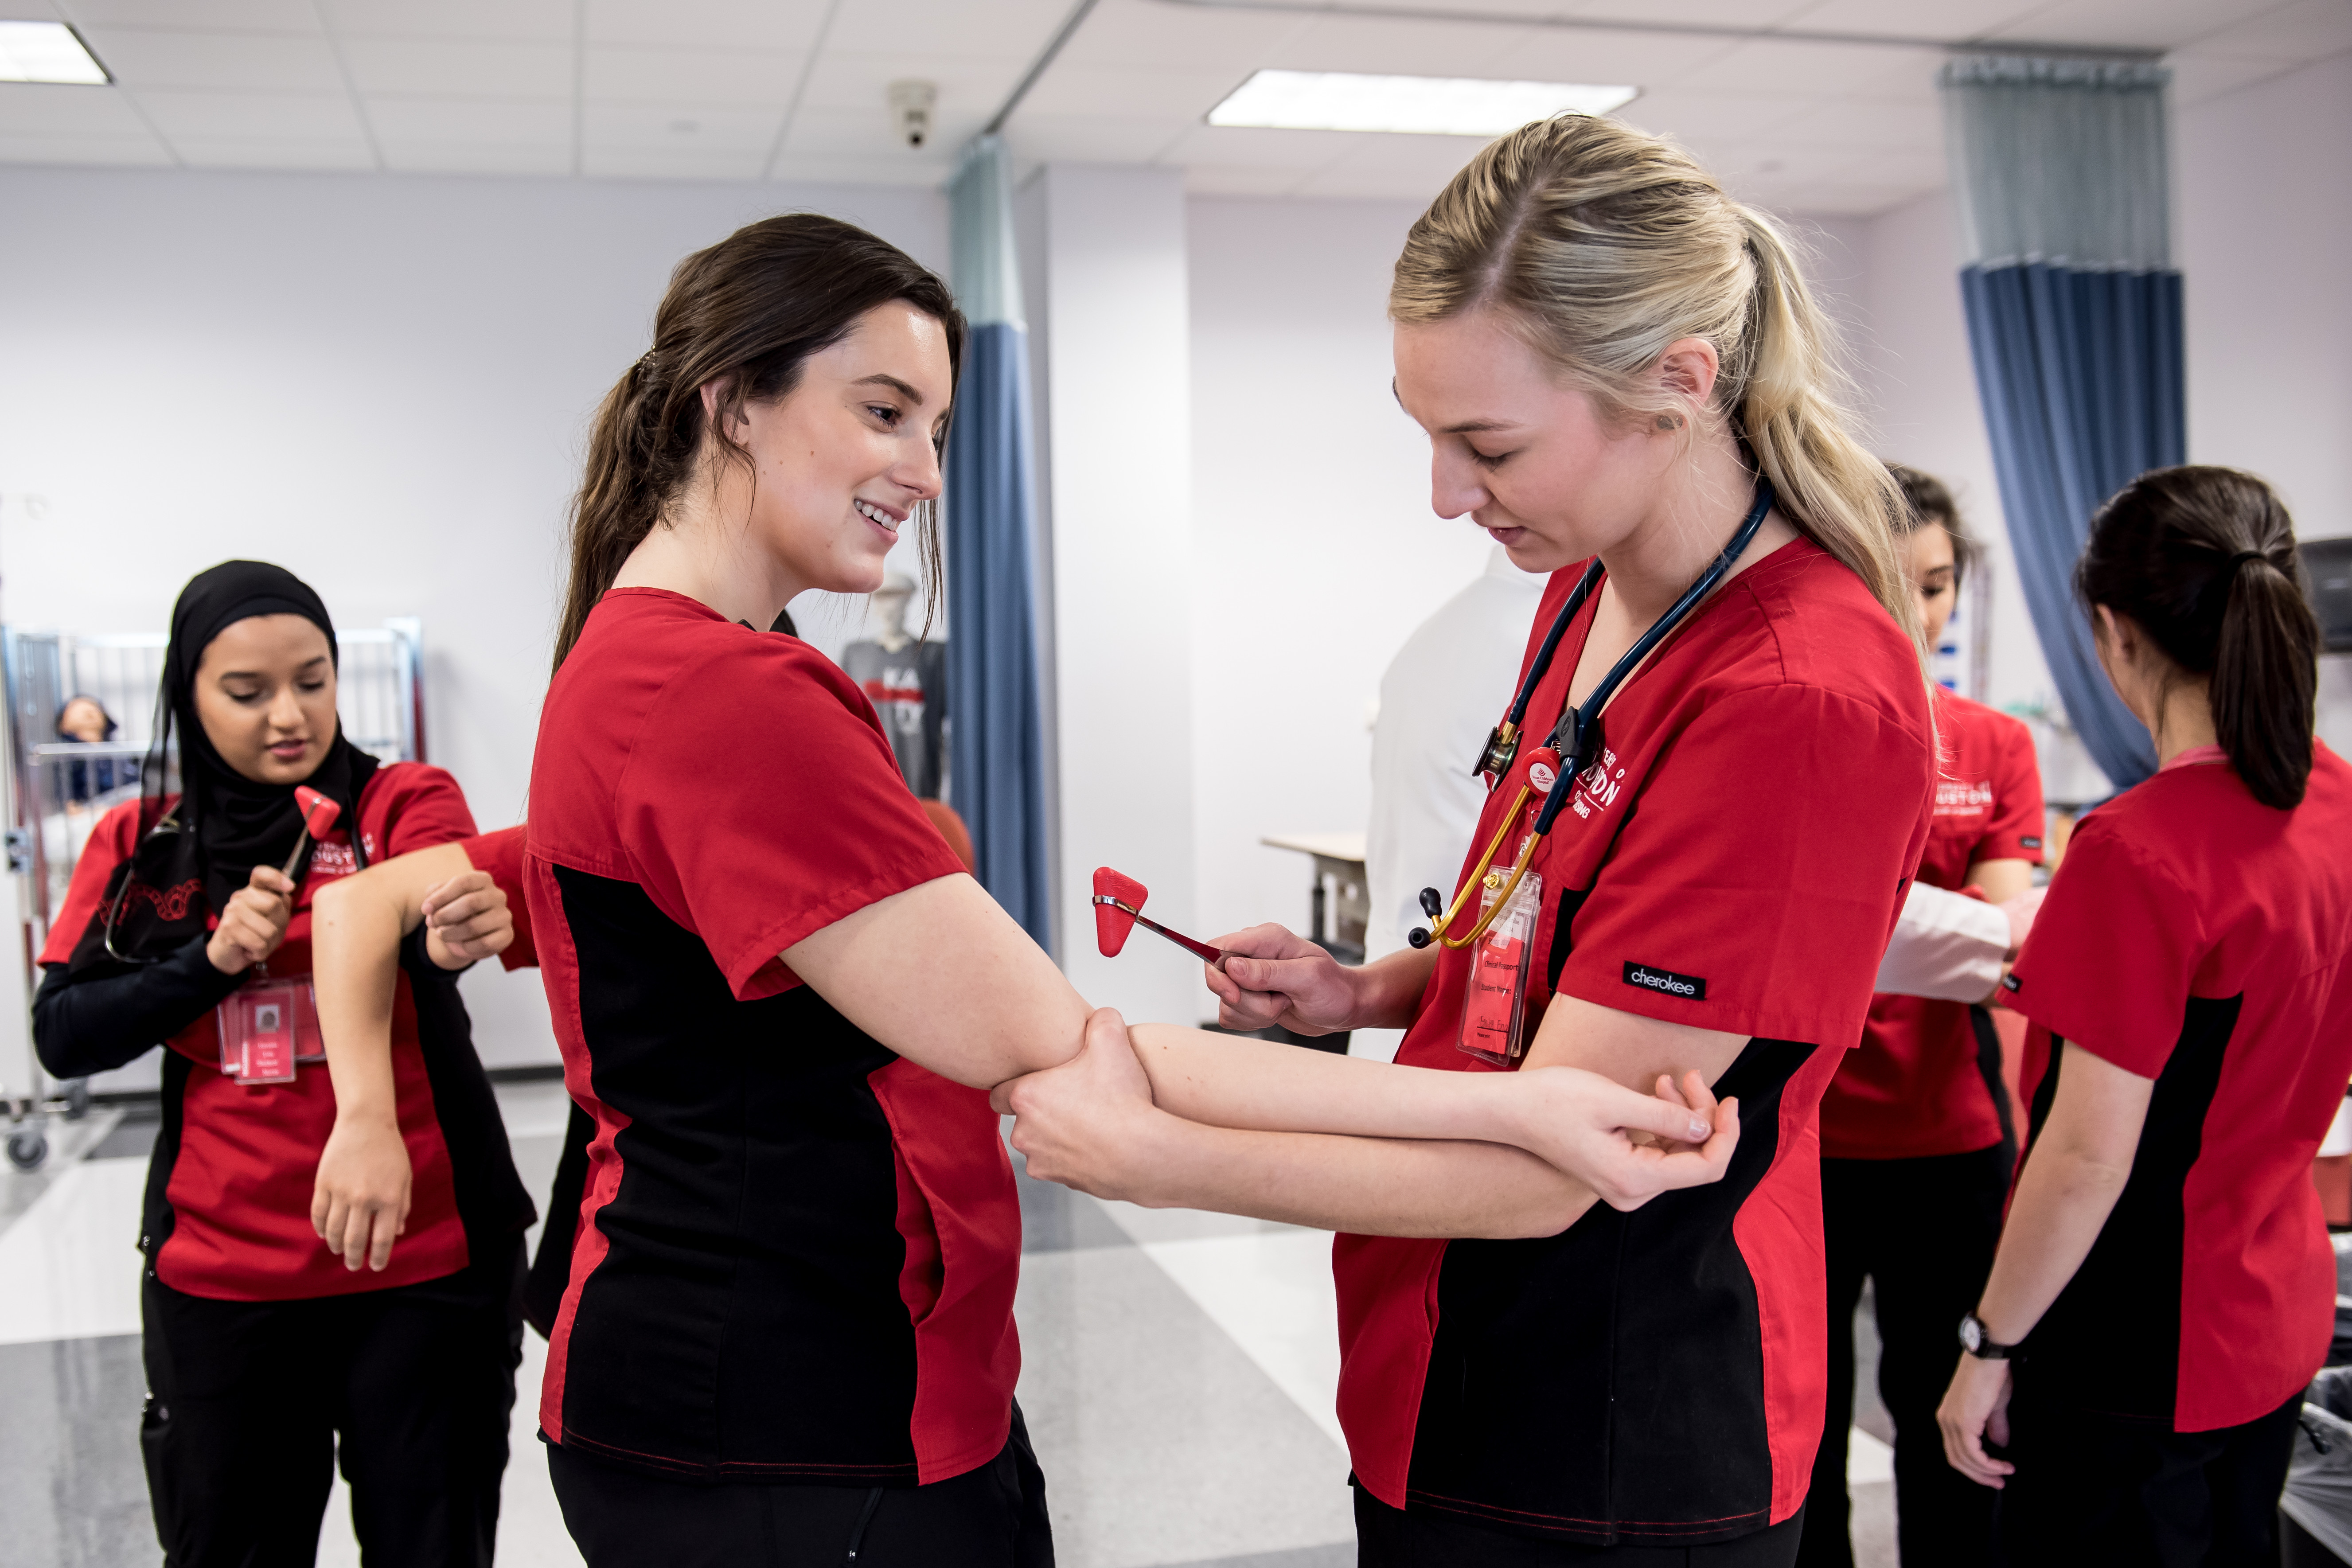 Nurse students practicing on each other for reflexes